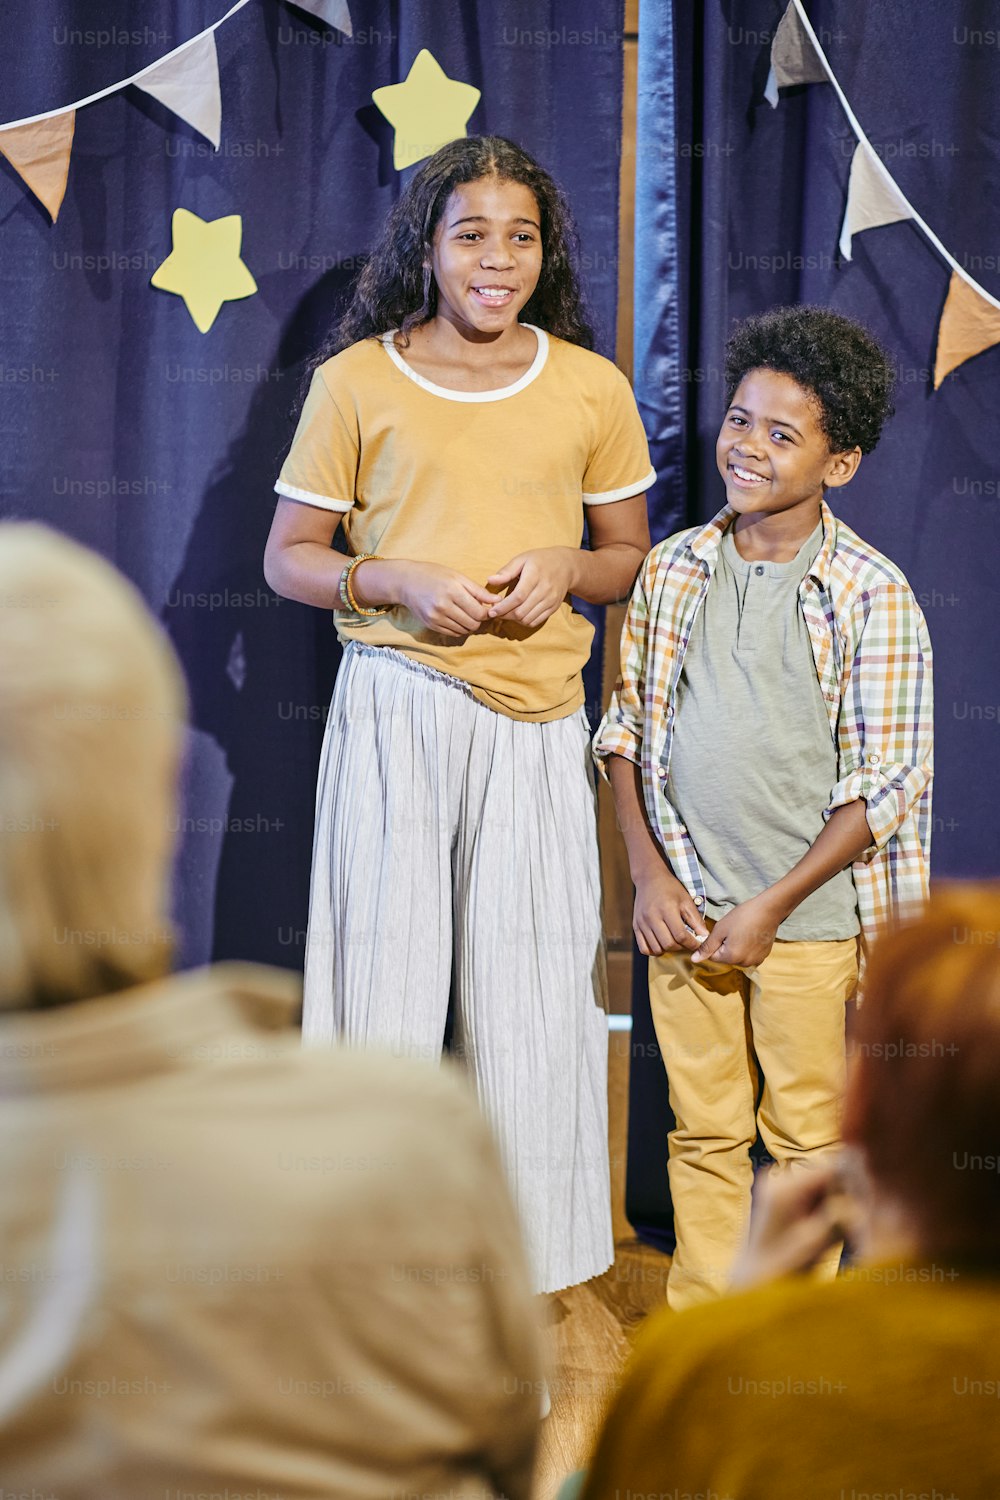 Happy siblings in casualwear performing on stage against blue curtains decorated with stars and flags